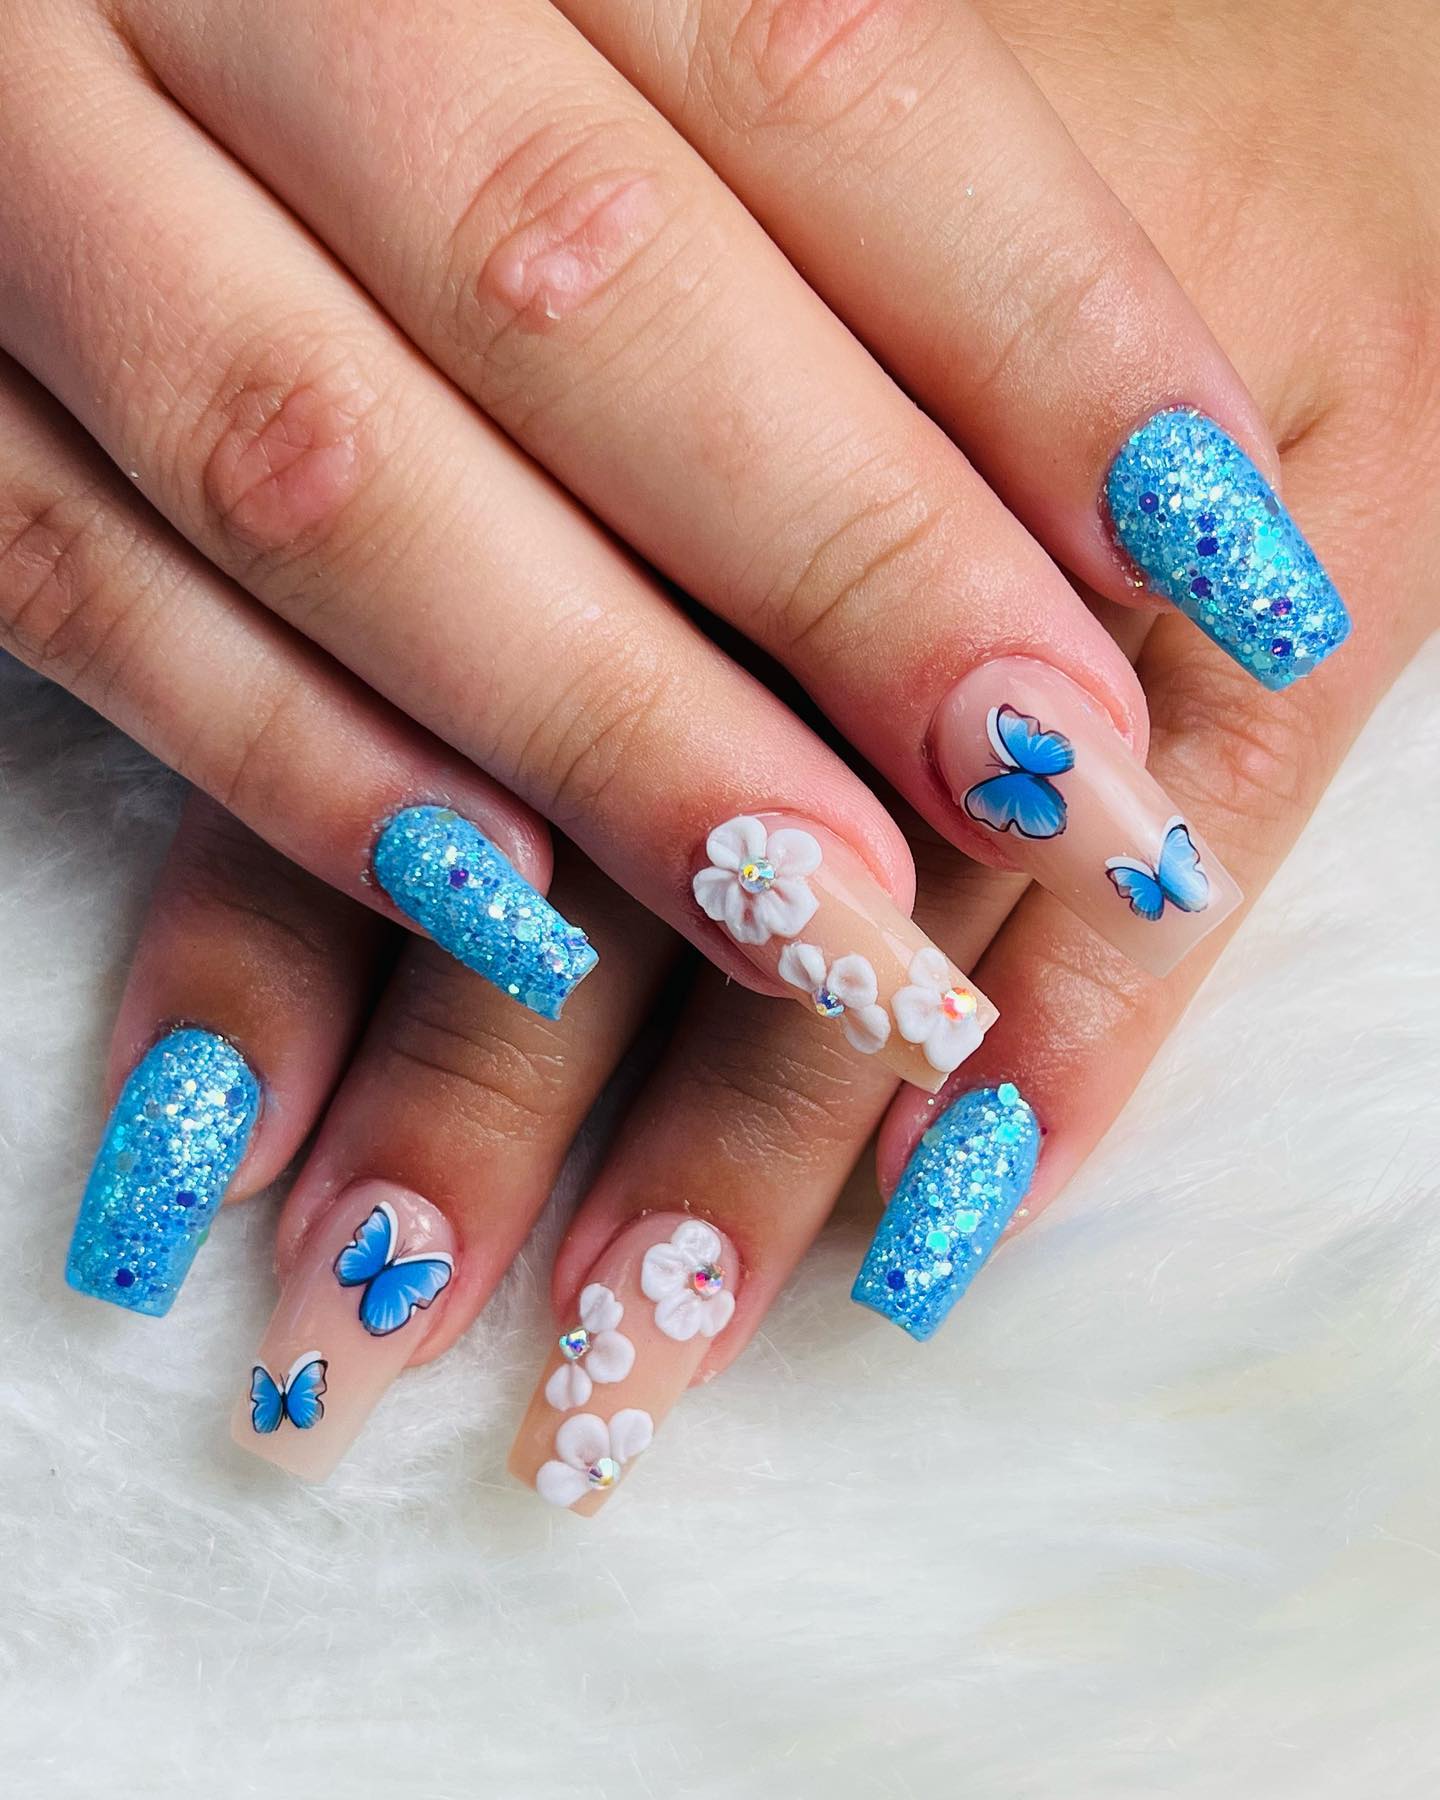 Why not having detailed nails? Shiny blue nails, nude nail polish with some flowers and blue butterflies on it are gorgeous.